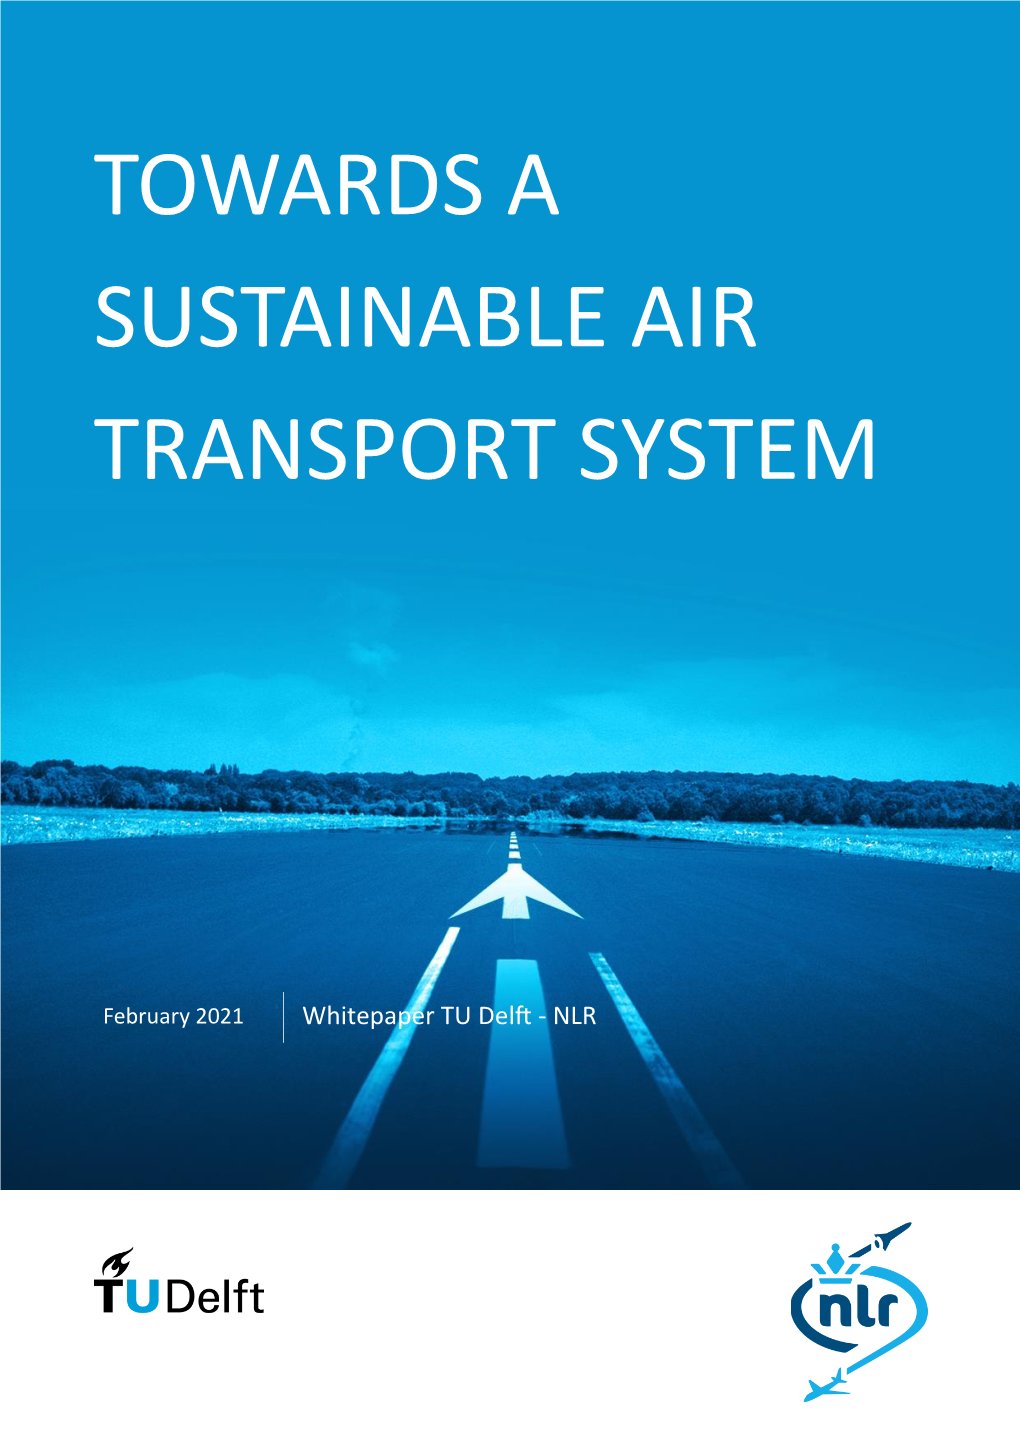 Towards a Sustainable Air Transport System